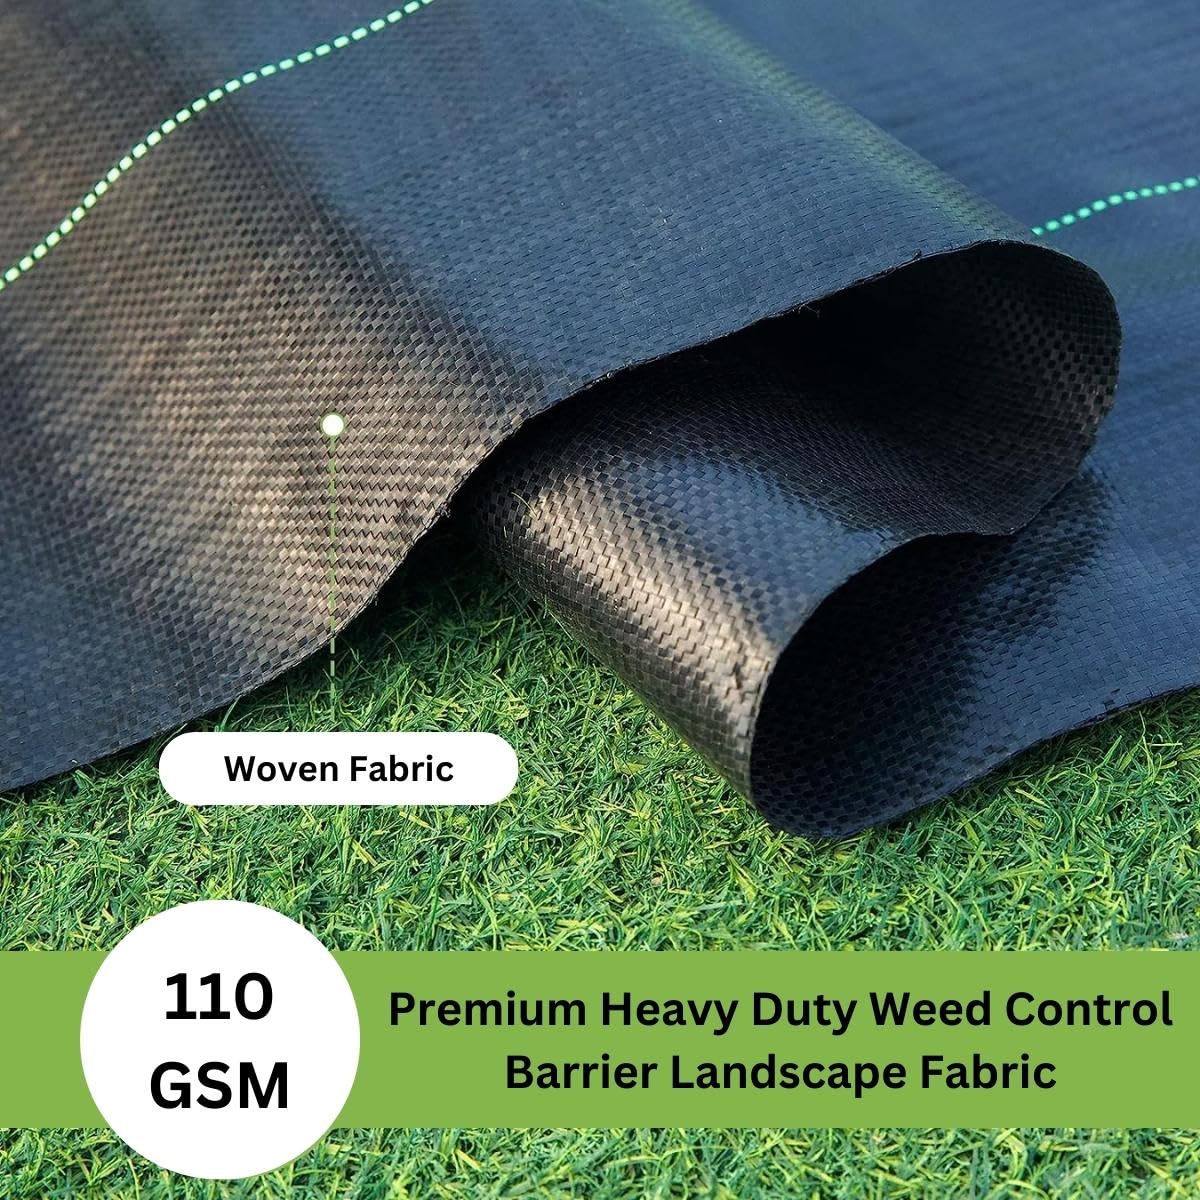 Singhal Premium Garden Weed Control Barrier Sheet Mat 2 Meter x 30 Meter, Landscape Fabric 110 GSM Heavy Duty Weed Block Gardening Mat for Gardens, Agriculture, Outdoor Projects (Black)